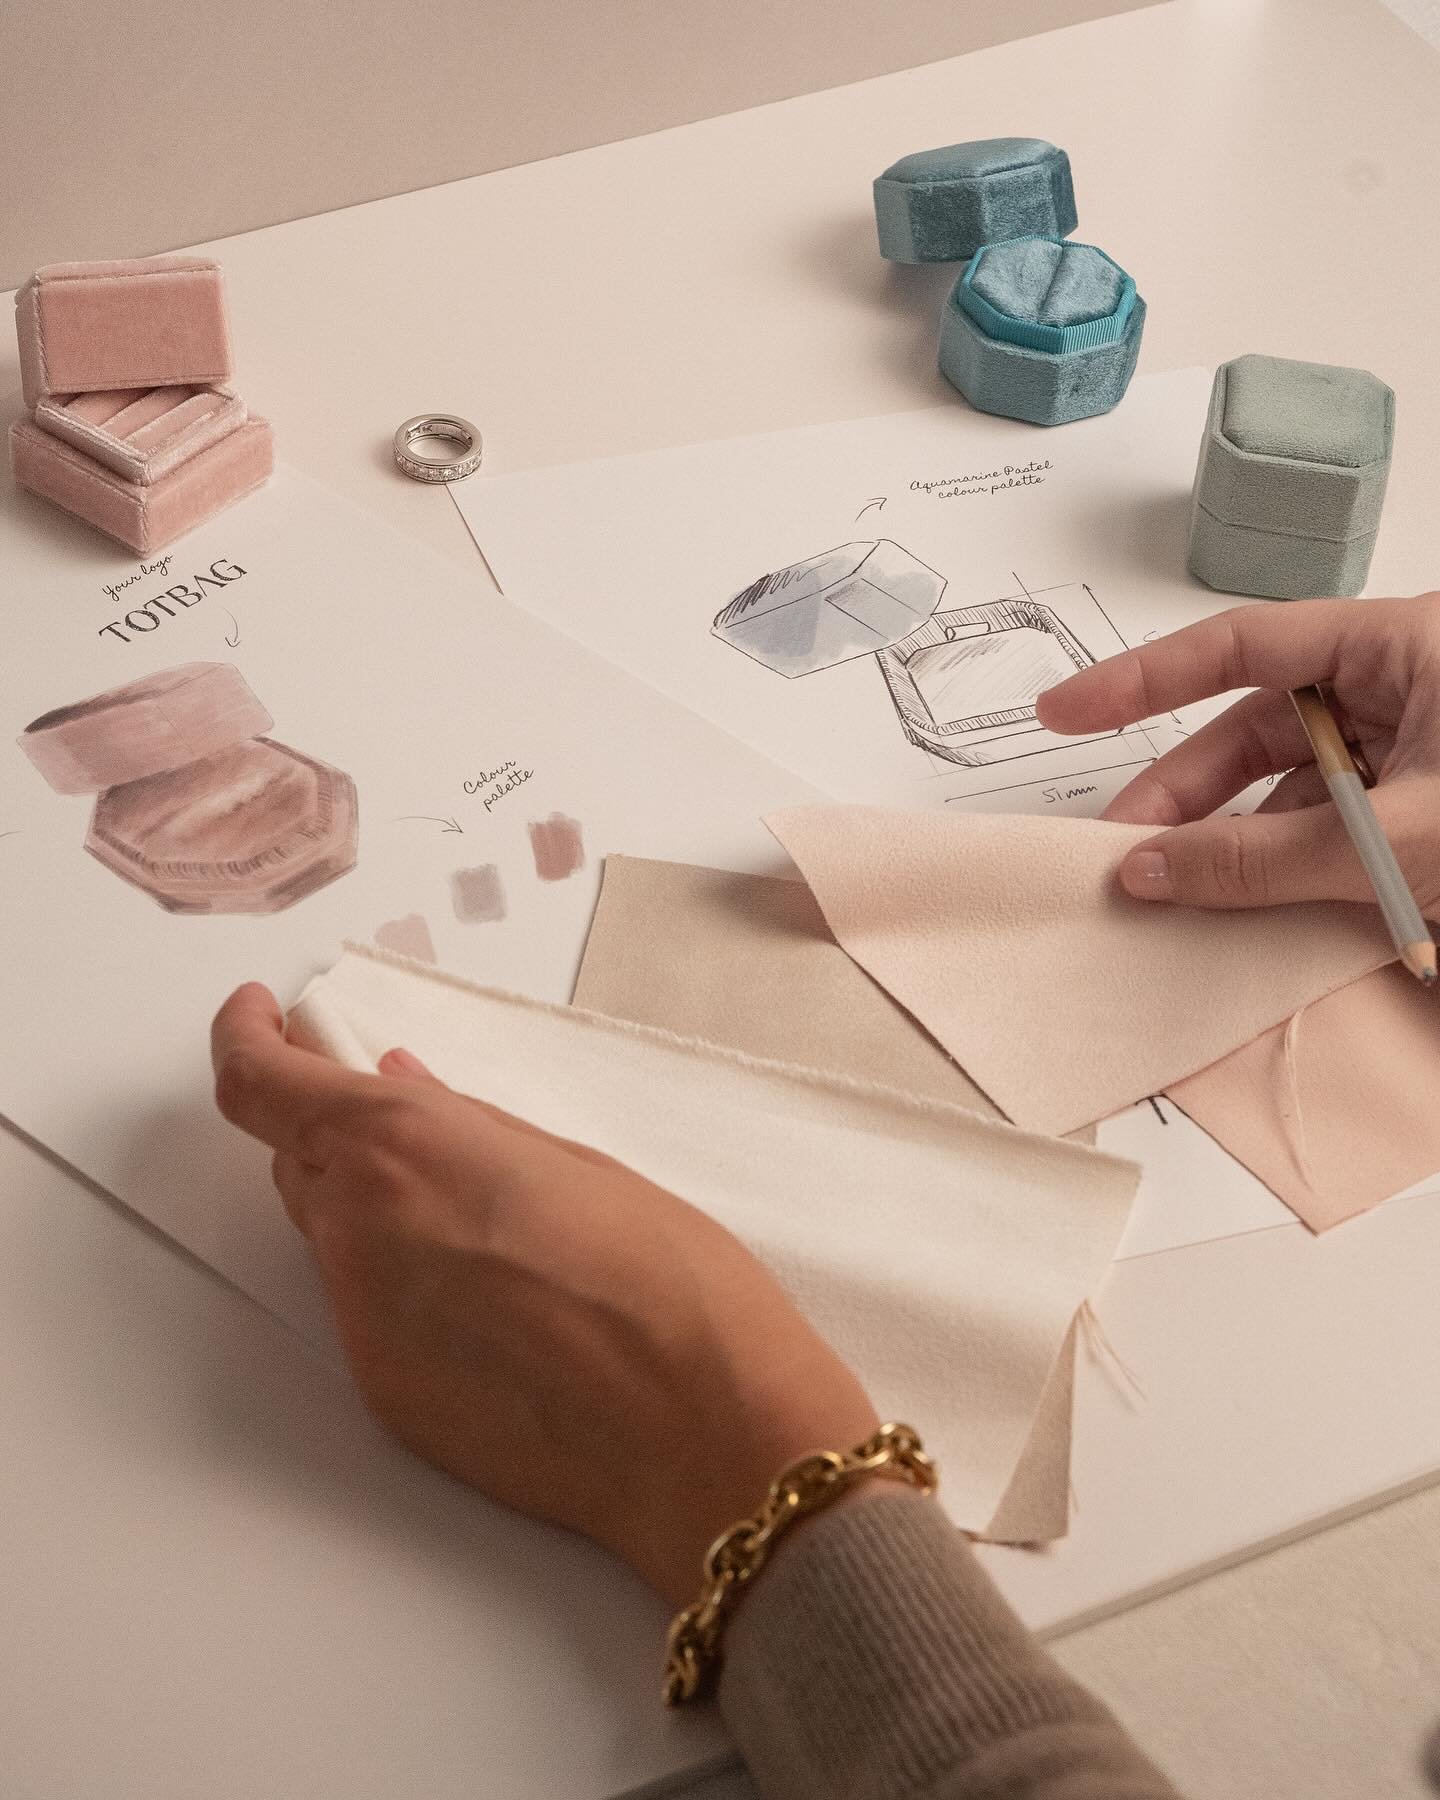 Creative process in the making! We love to begin new bespoke packaging projects to suit our clients needs and work closely with them to select colours, materials, logos and finishes ✨

#bespokepackaging #estuchesamedida #packagingideas #wedding #wedd